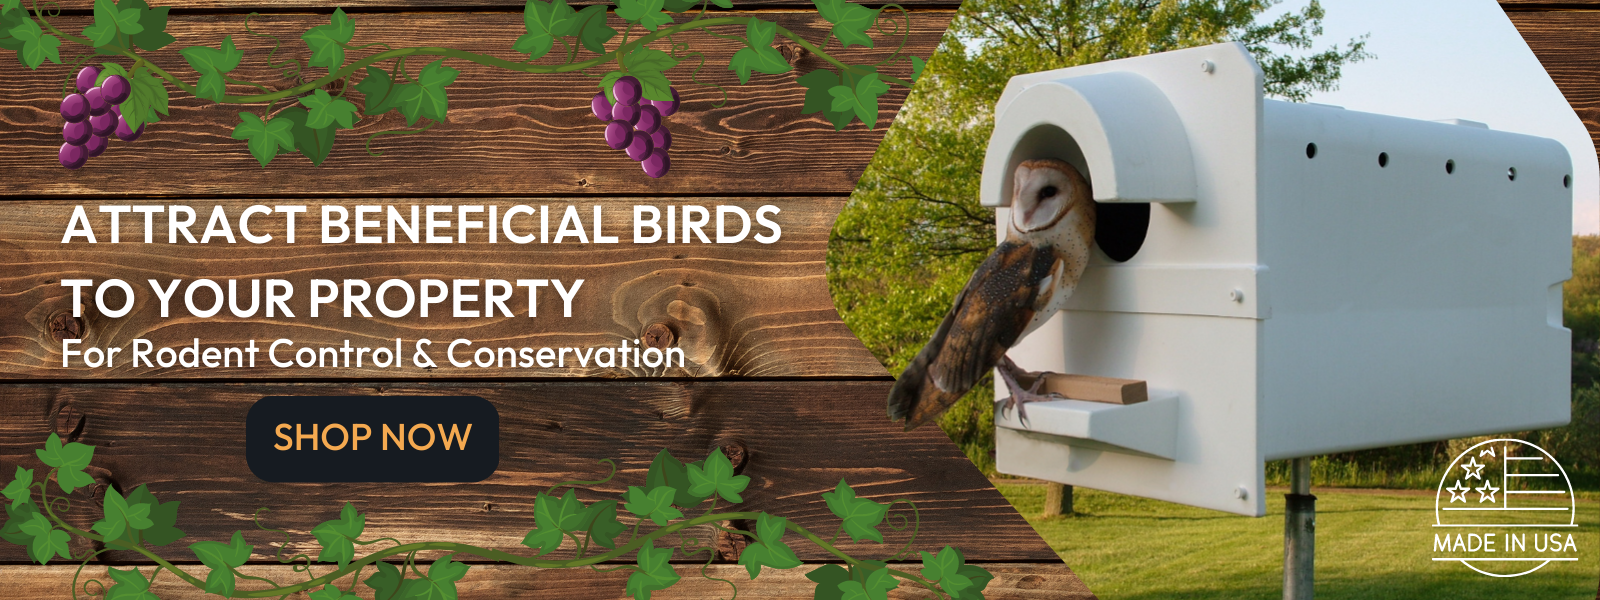 Attract beneficial birds to your property for rodent control and conservation